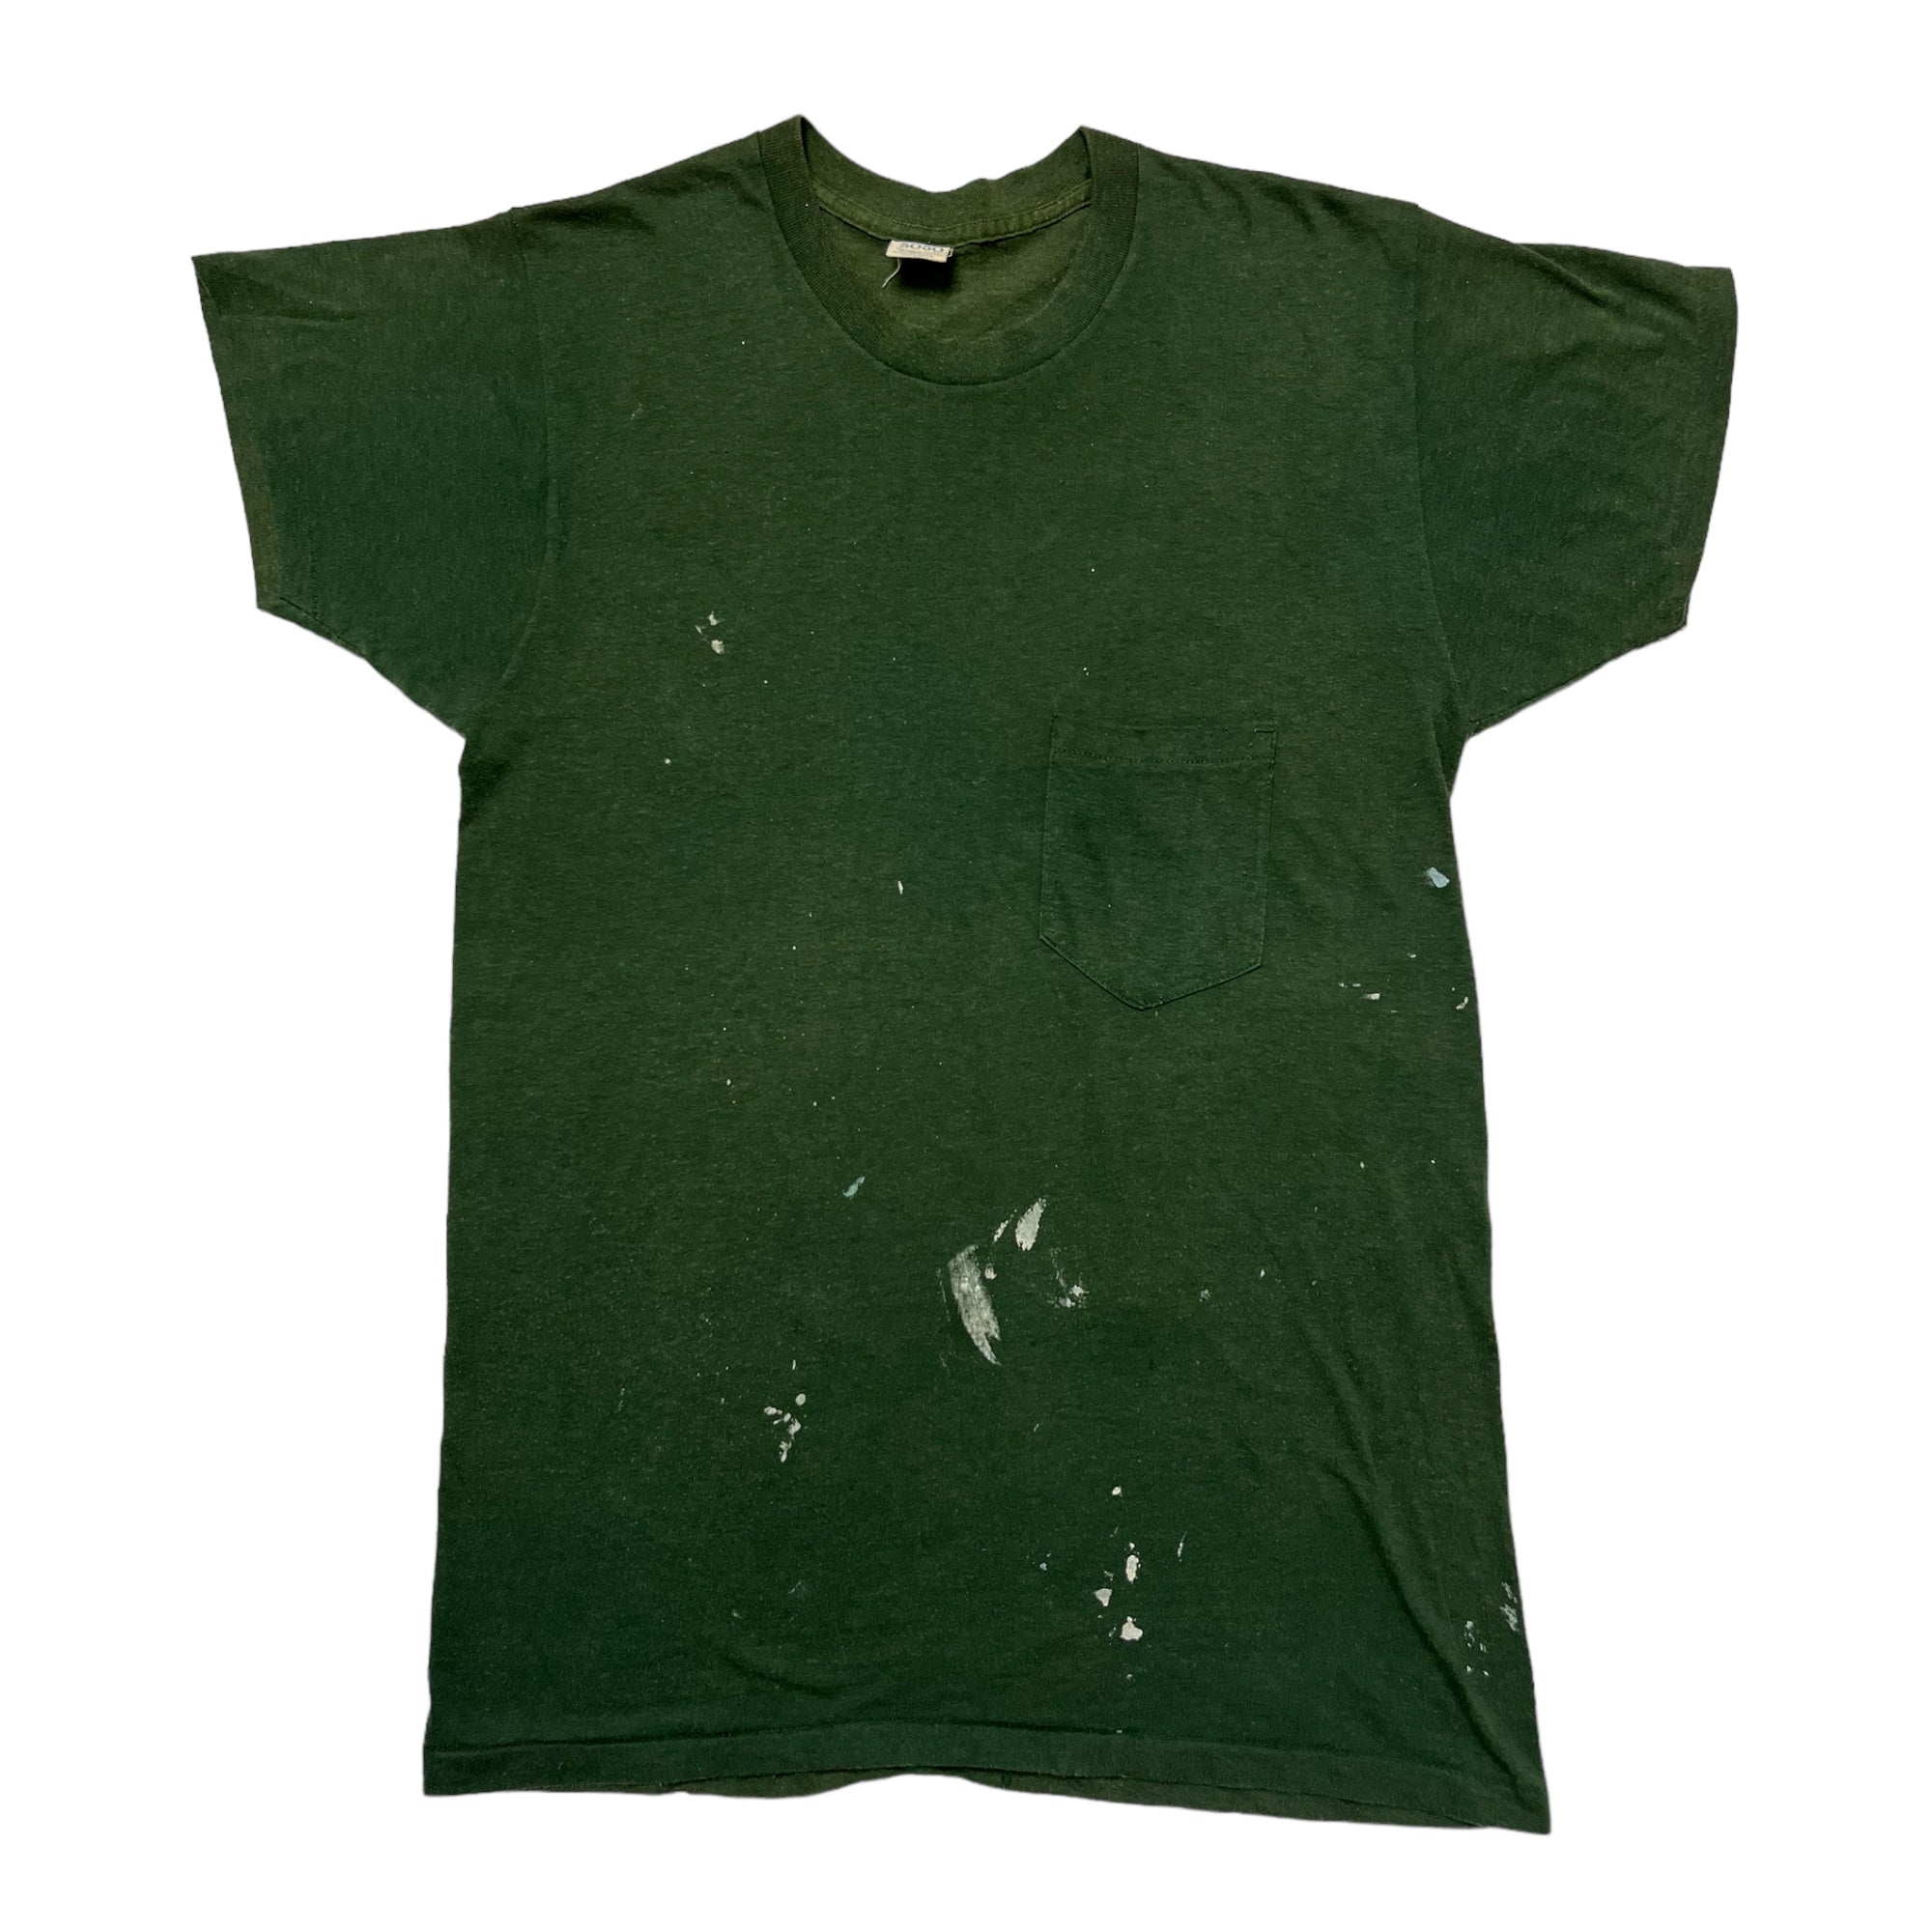 1970s Paint Distressed Pocket T-Shirt - Faded Military Green - M/L